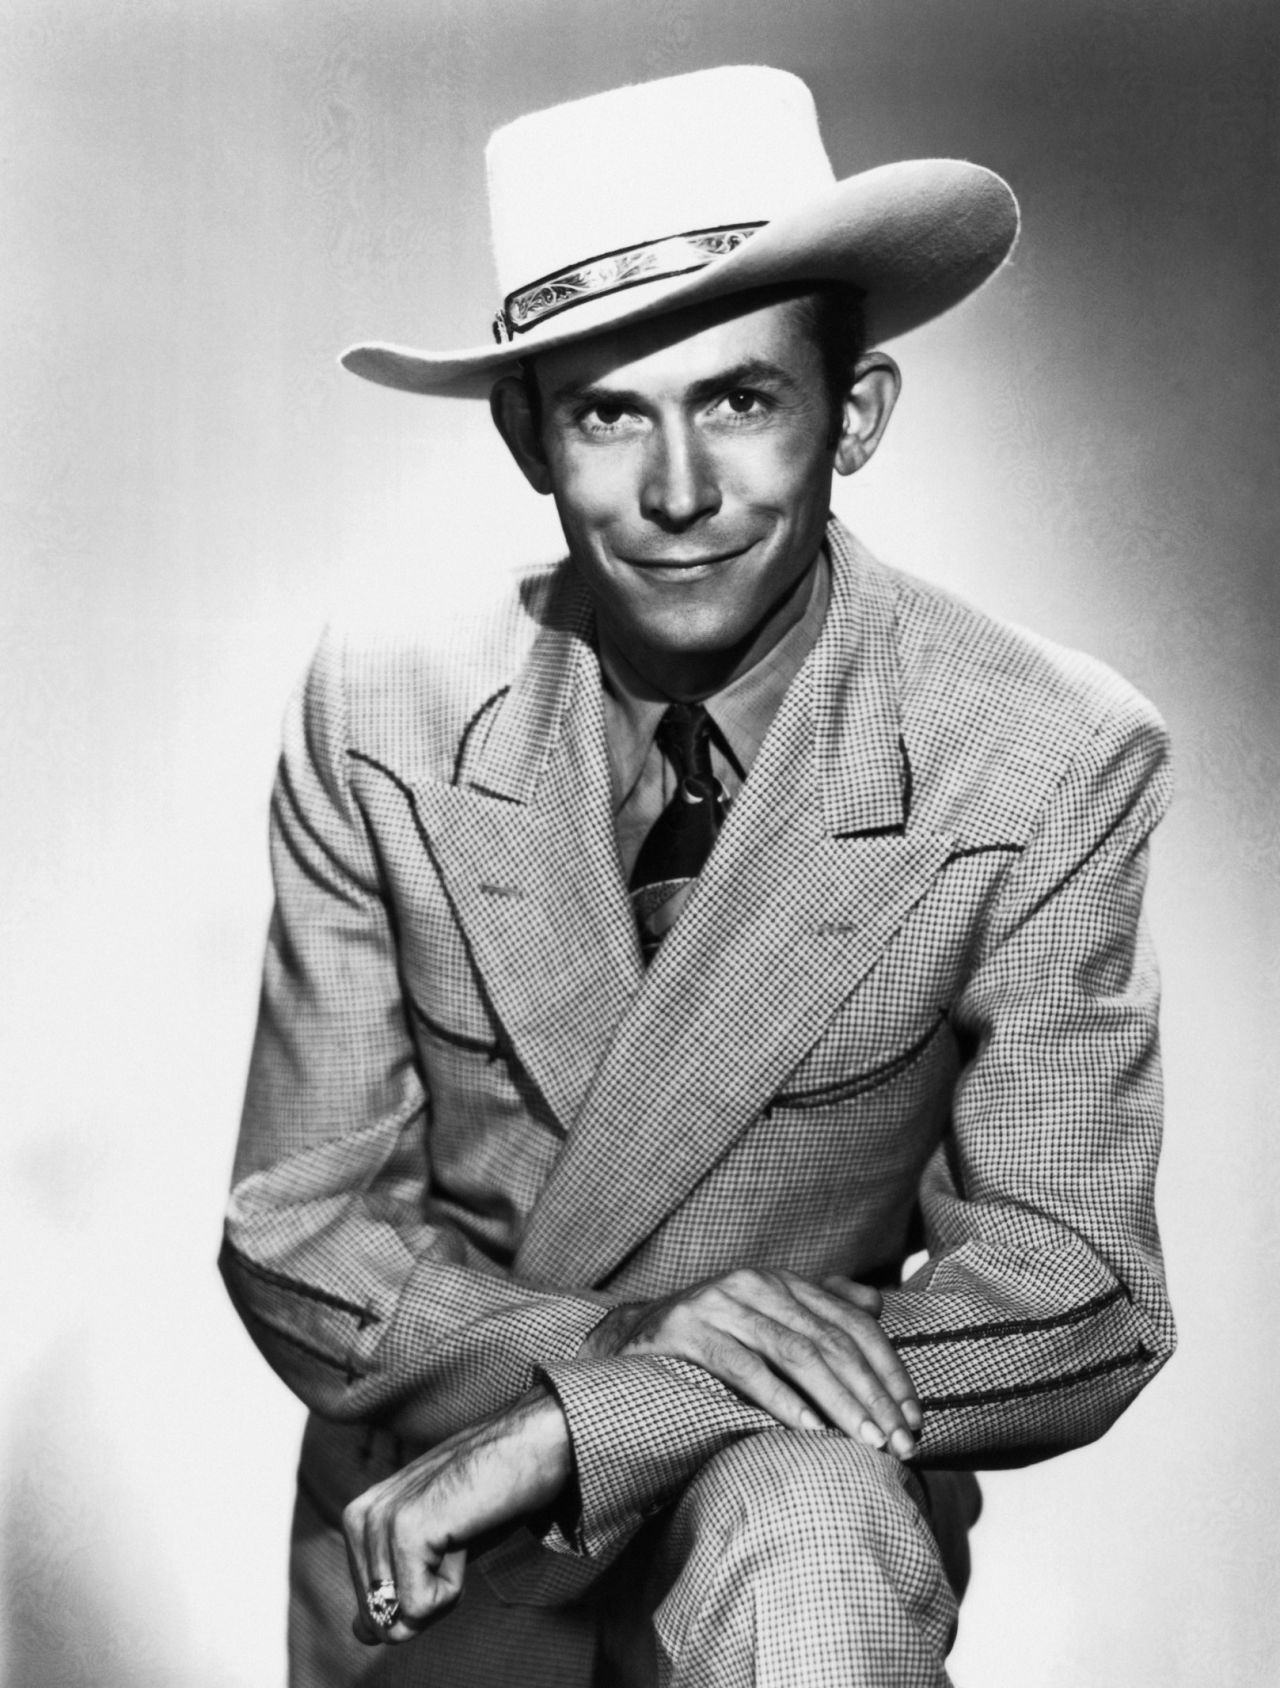 Country music legend Hank Williams died in the back seat of his Cadillac in 1953 of an overdose of morphine and alcohol while being driven to a concert. The story goes that he was injected by a doctor with vitamin B12 and morphine, an opioid painkiller, before climbing into the car with a bottle of whiskey. 